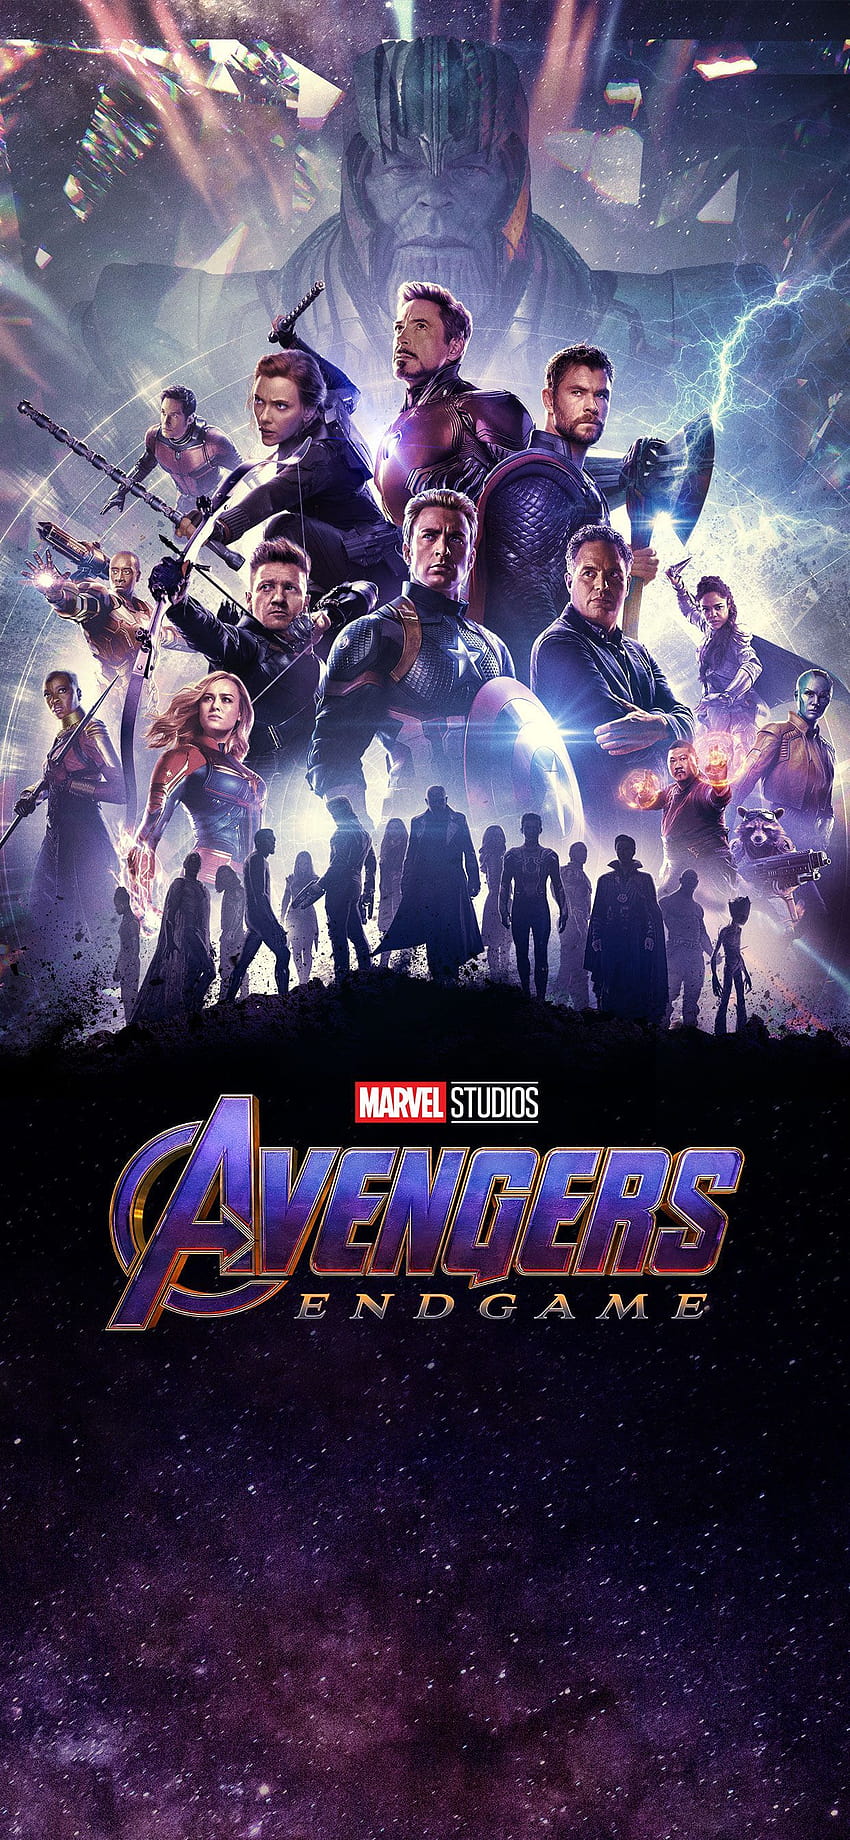 Endgame Avengers Endgame GIF  Endgame Avengers Endgame  Discover  Share  GIFs